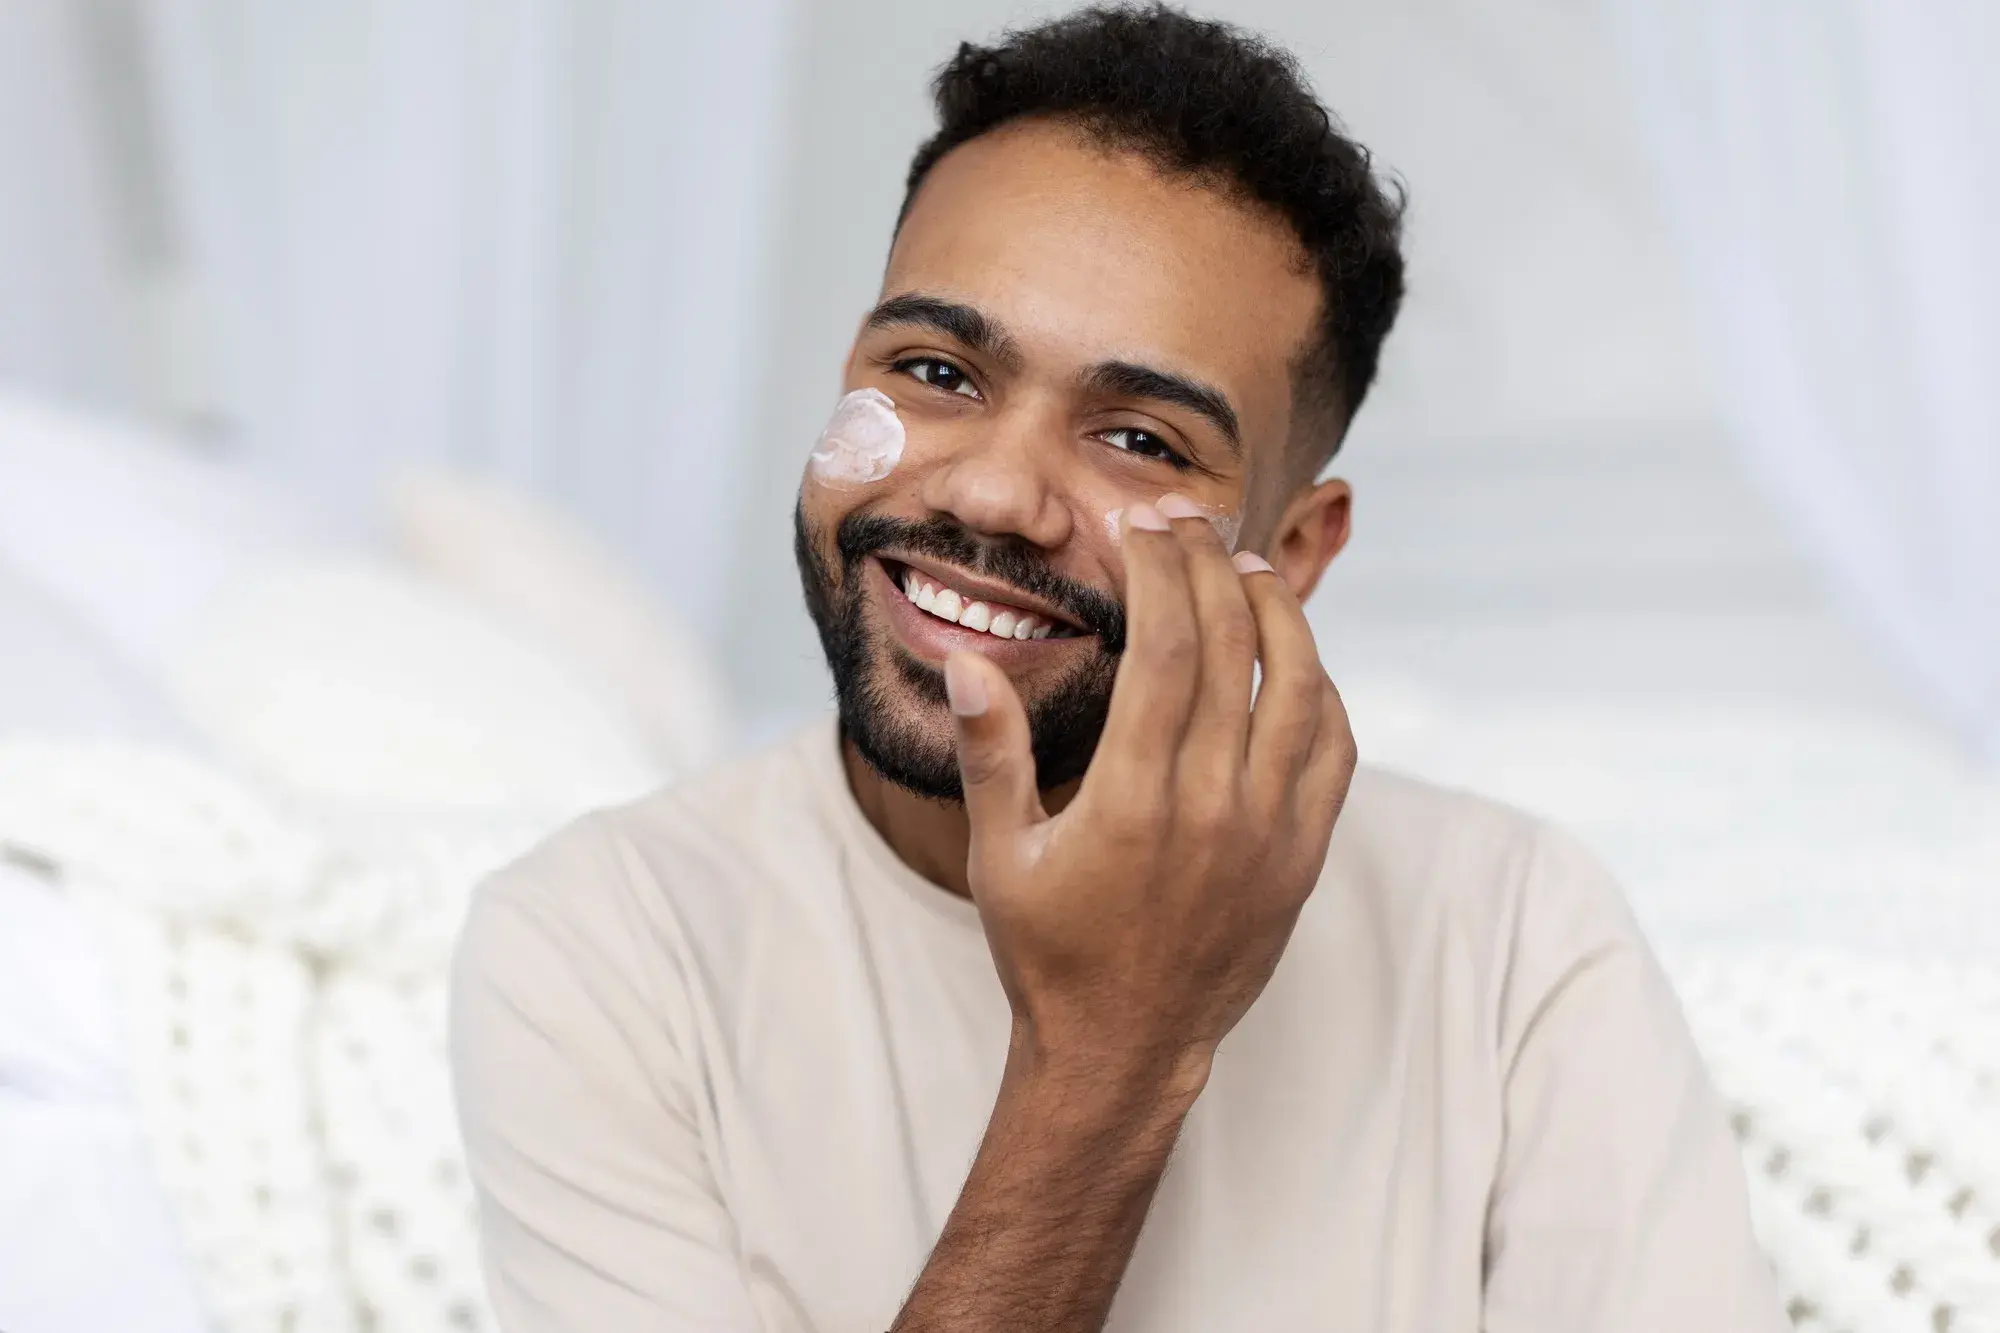 What's the Difference Between Women's and Men's Skin Care? Beauty Products for Men's Skin